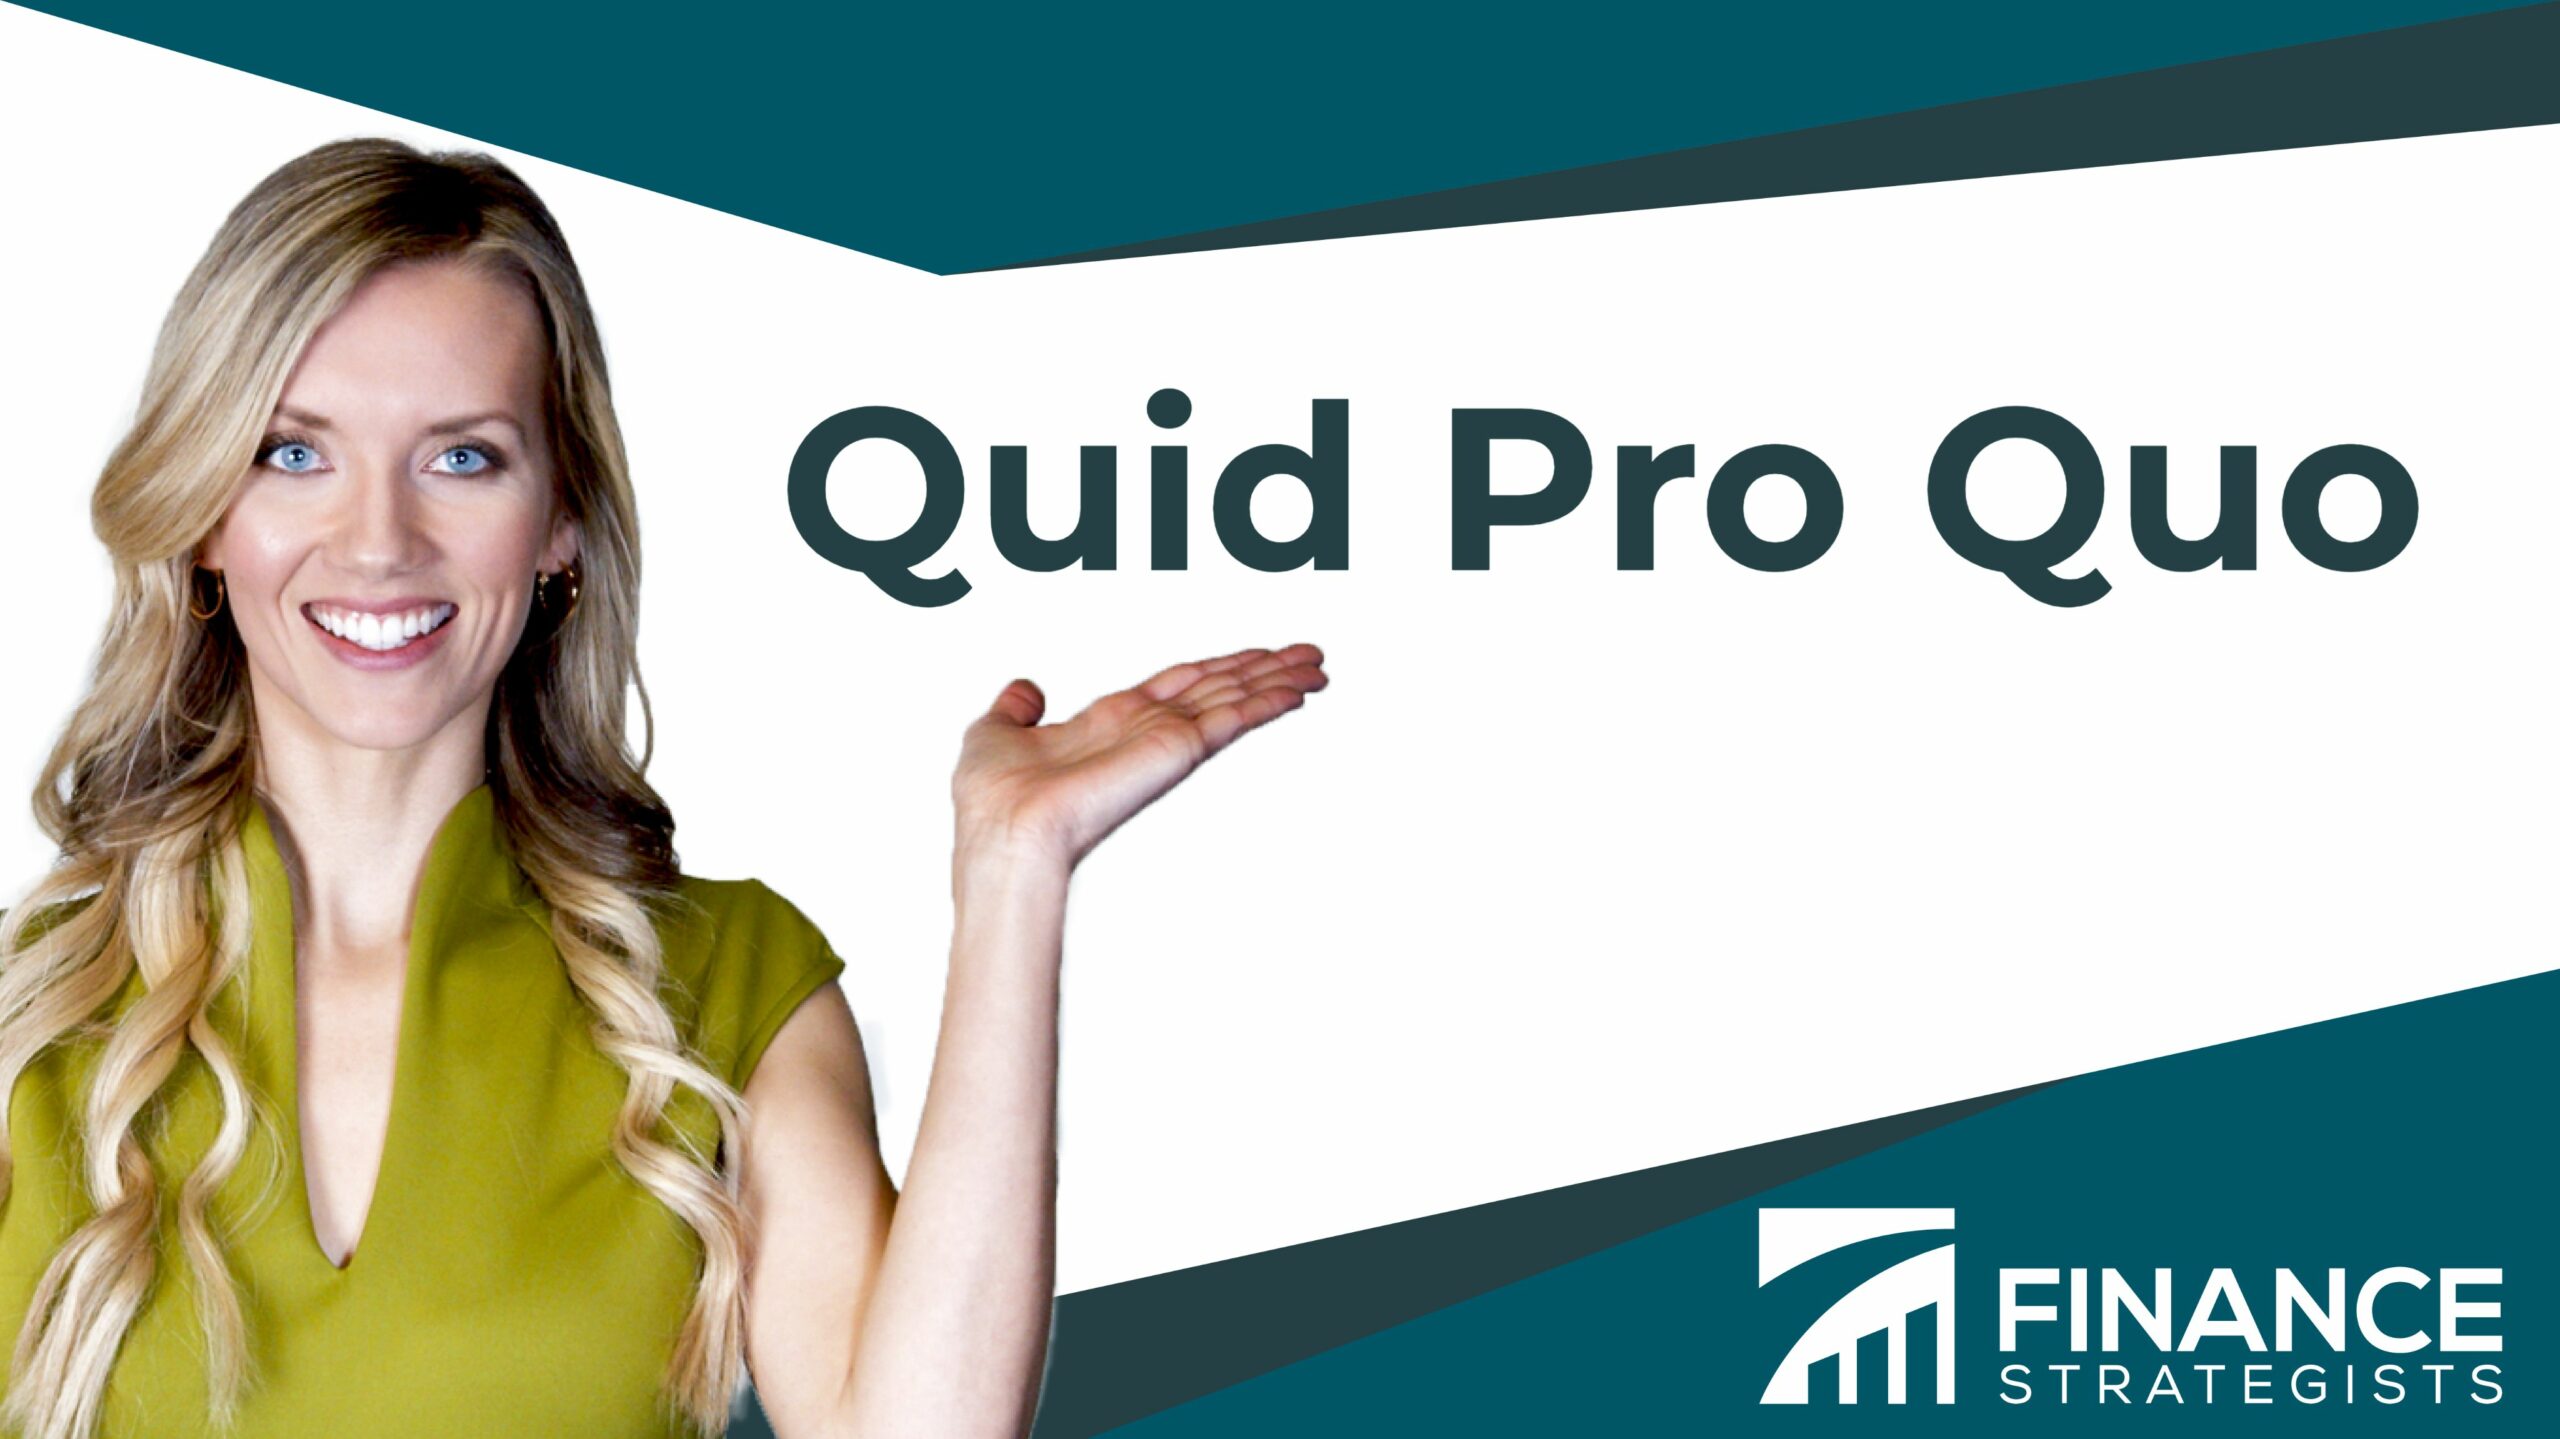 Quid Pro Quo Meaning & Use Finance Strategists